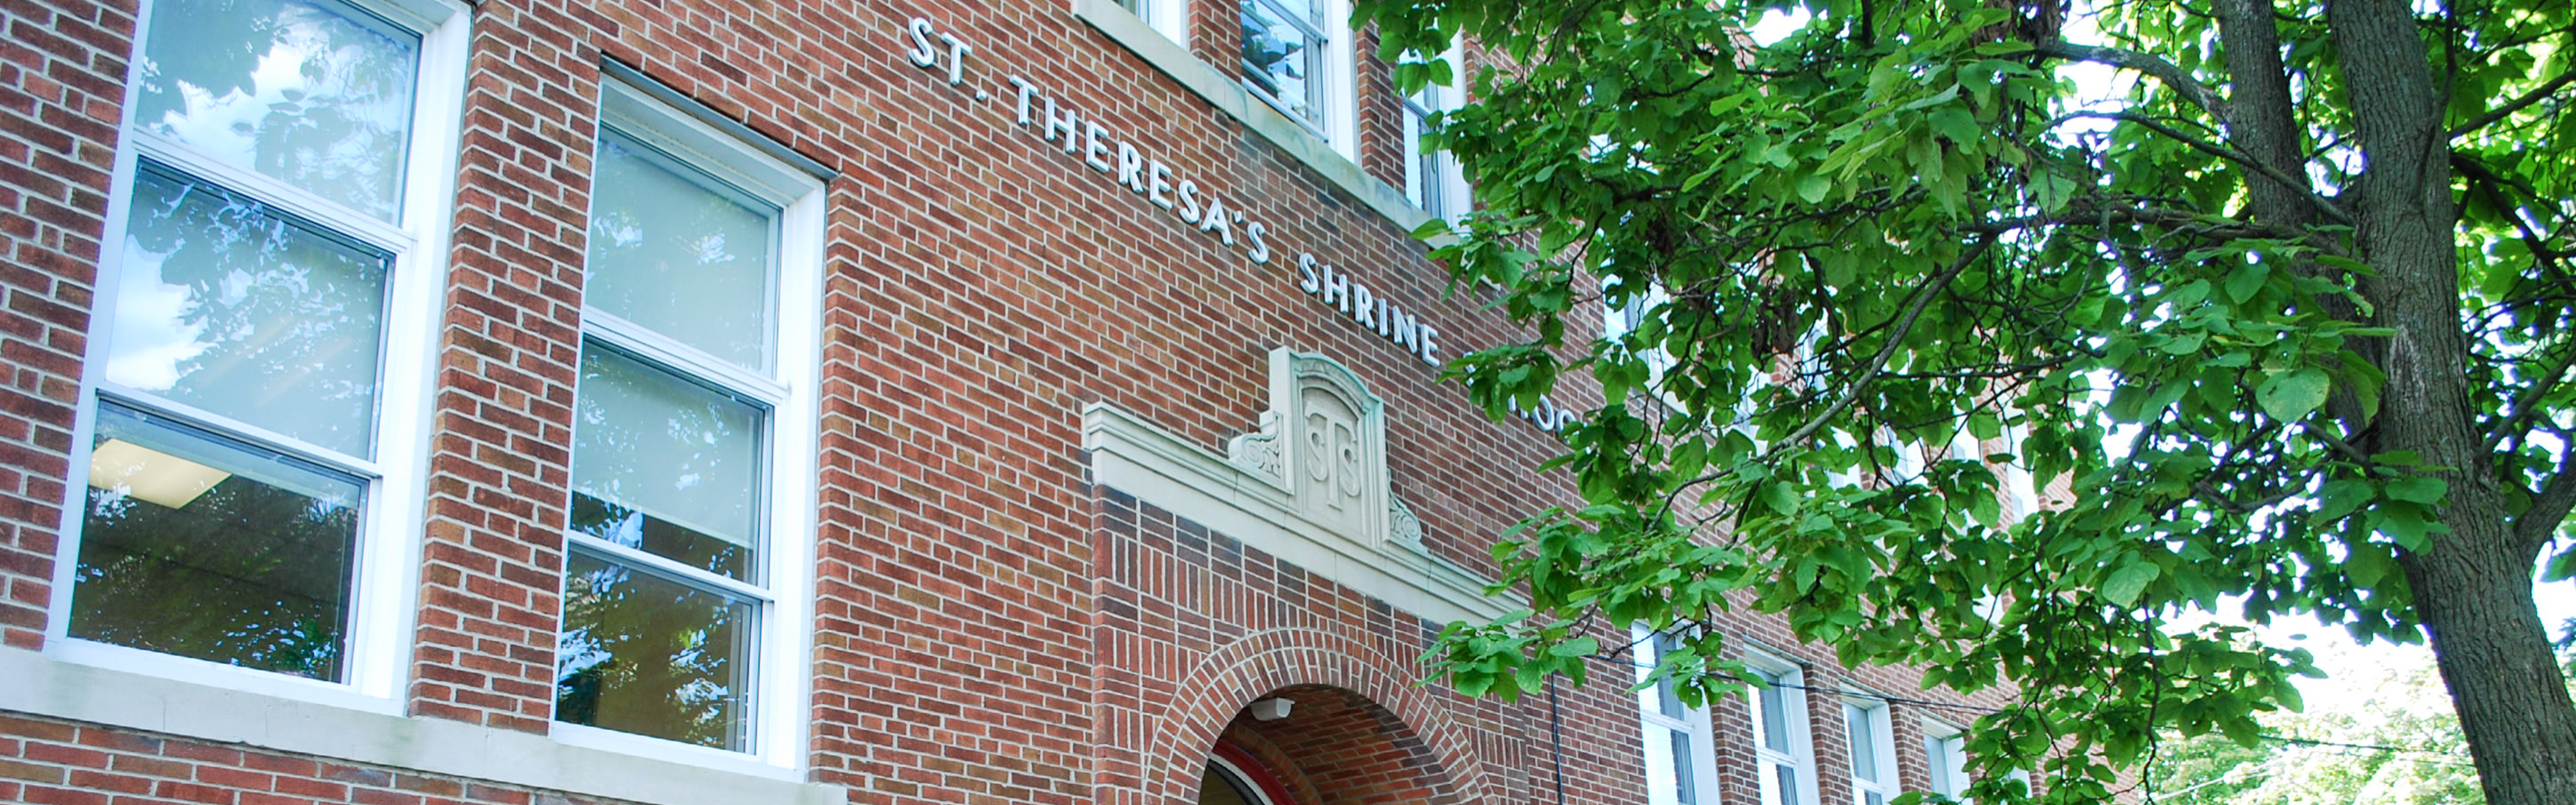 The front of the St. Theresa Shrine Catholic School building.